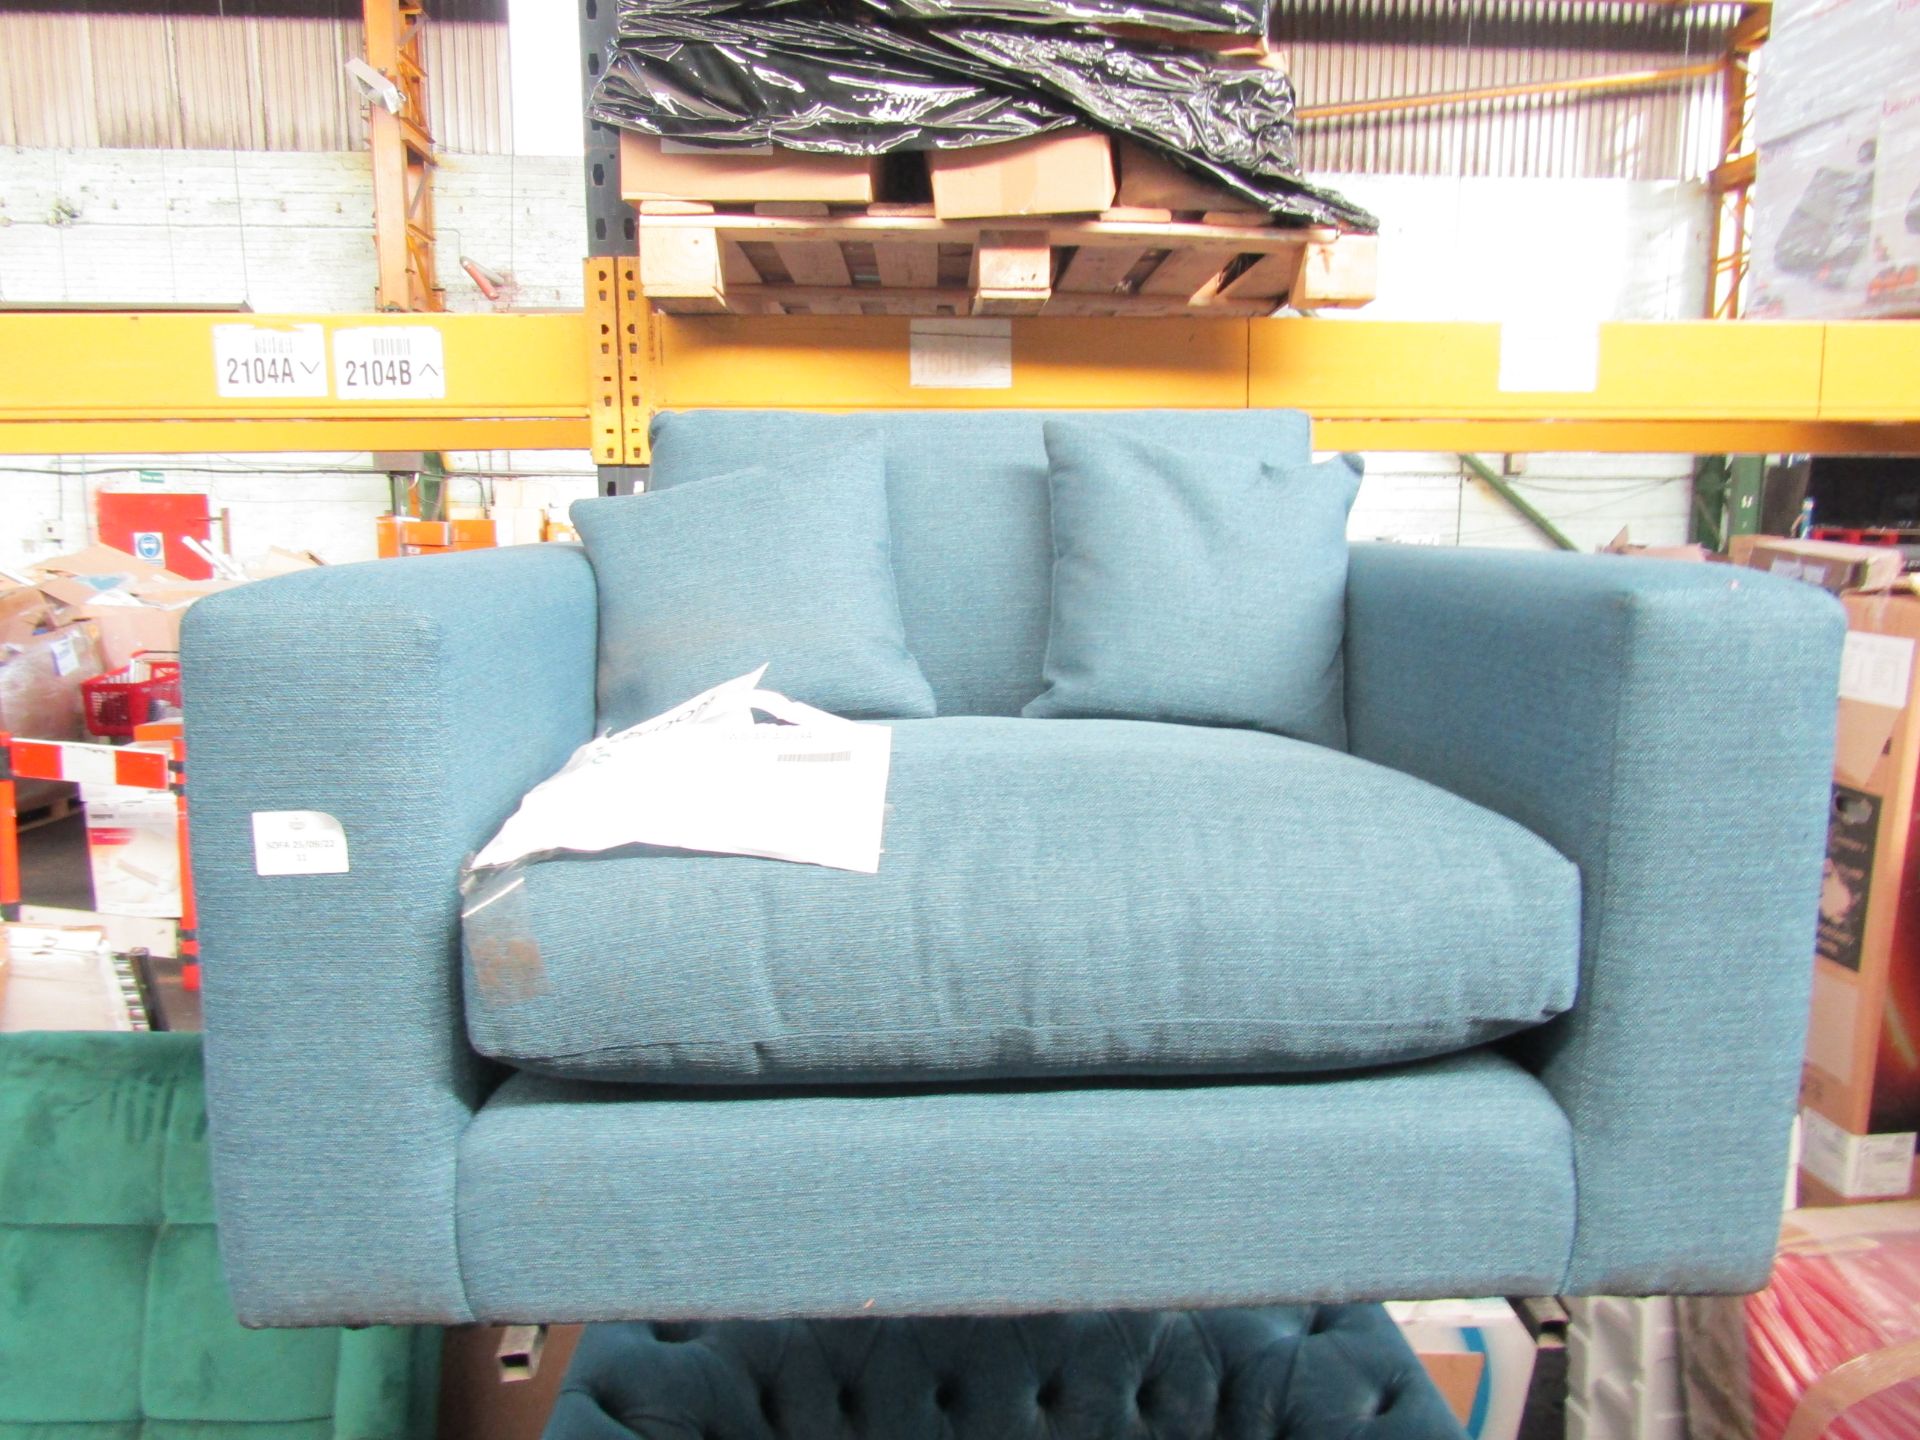 Swoon Althaea Love Seat In Agate Blue Weave RRP ?949.00 (PLT SWO-AP-A-2984) - The items in this